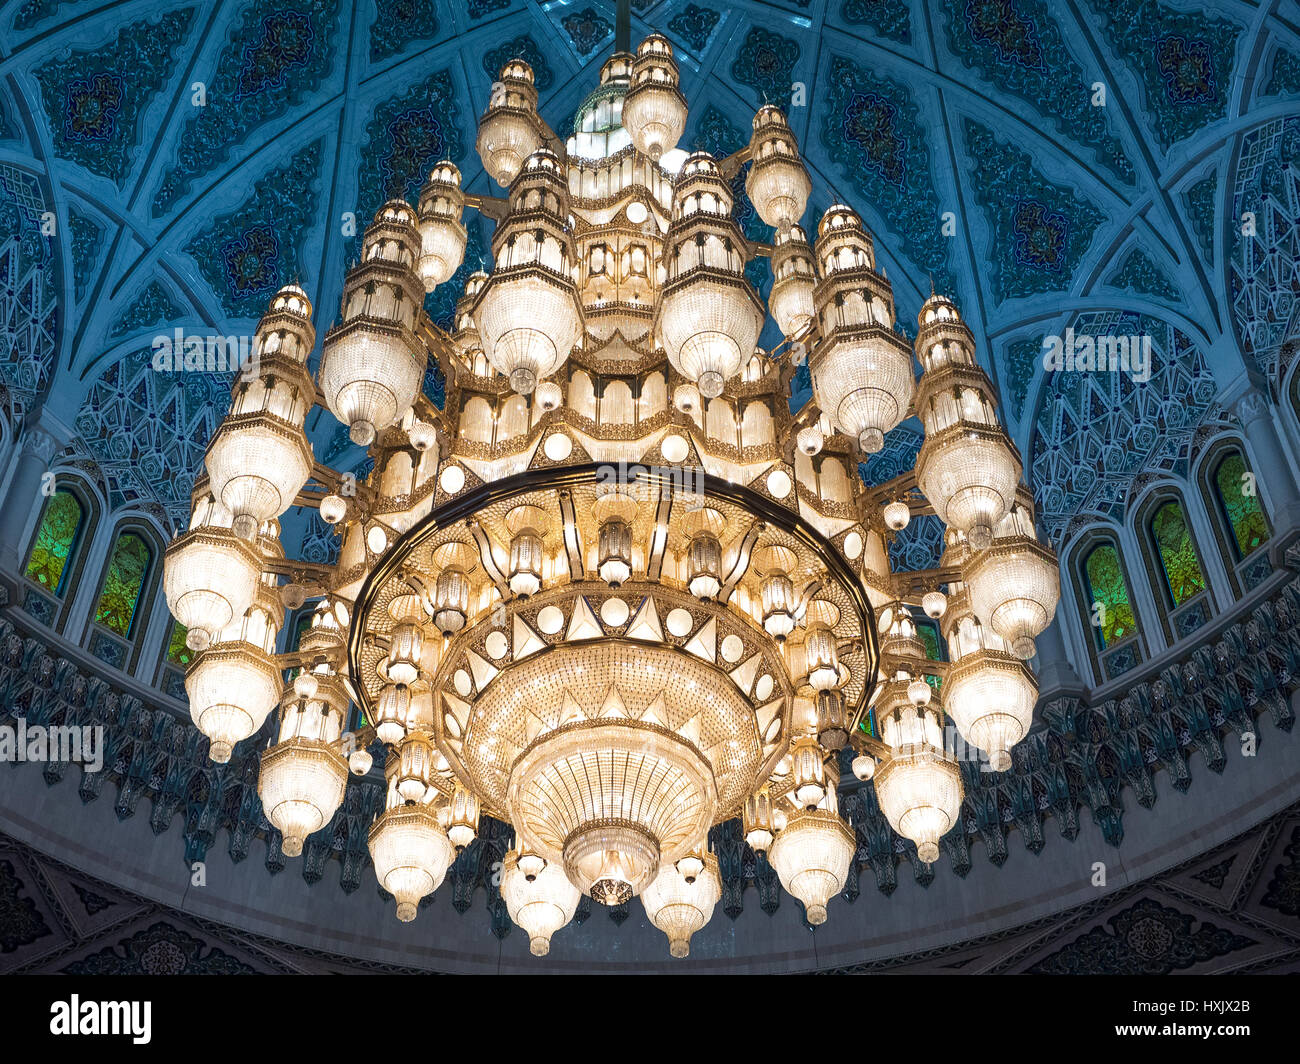 Giant lamp made with over 600.000 crystals in the prayer room of Sultan Qaboos Grand Mosque of Muscat, Oman. Stock Photo